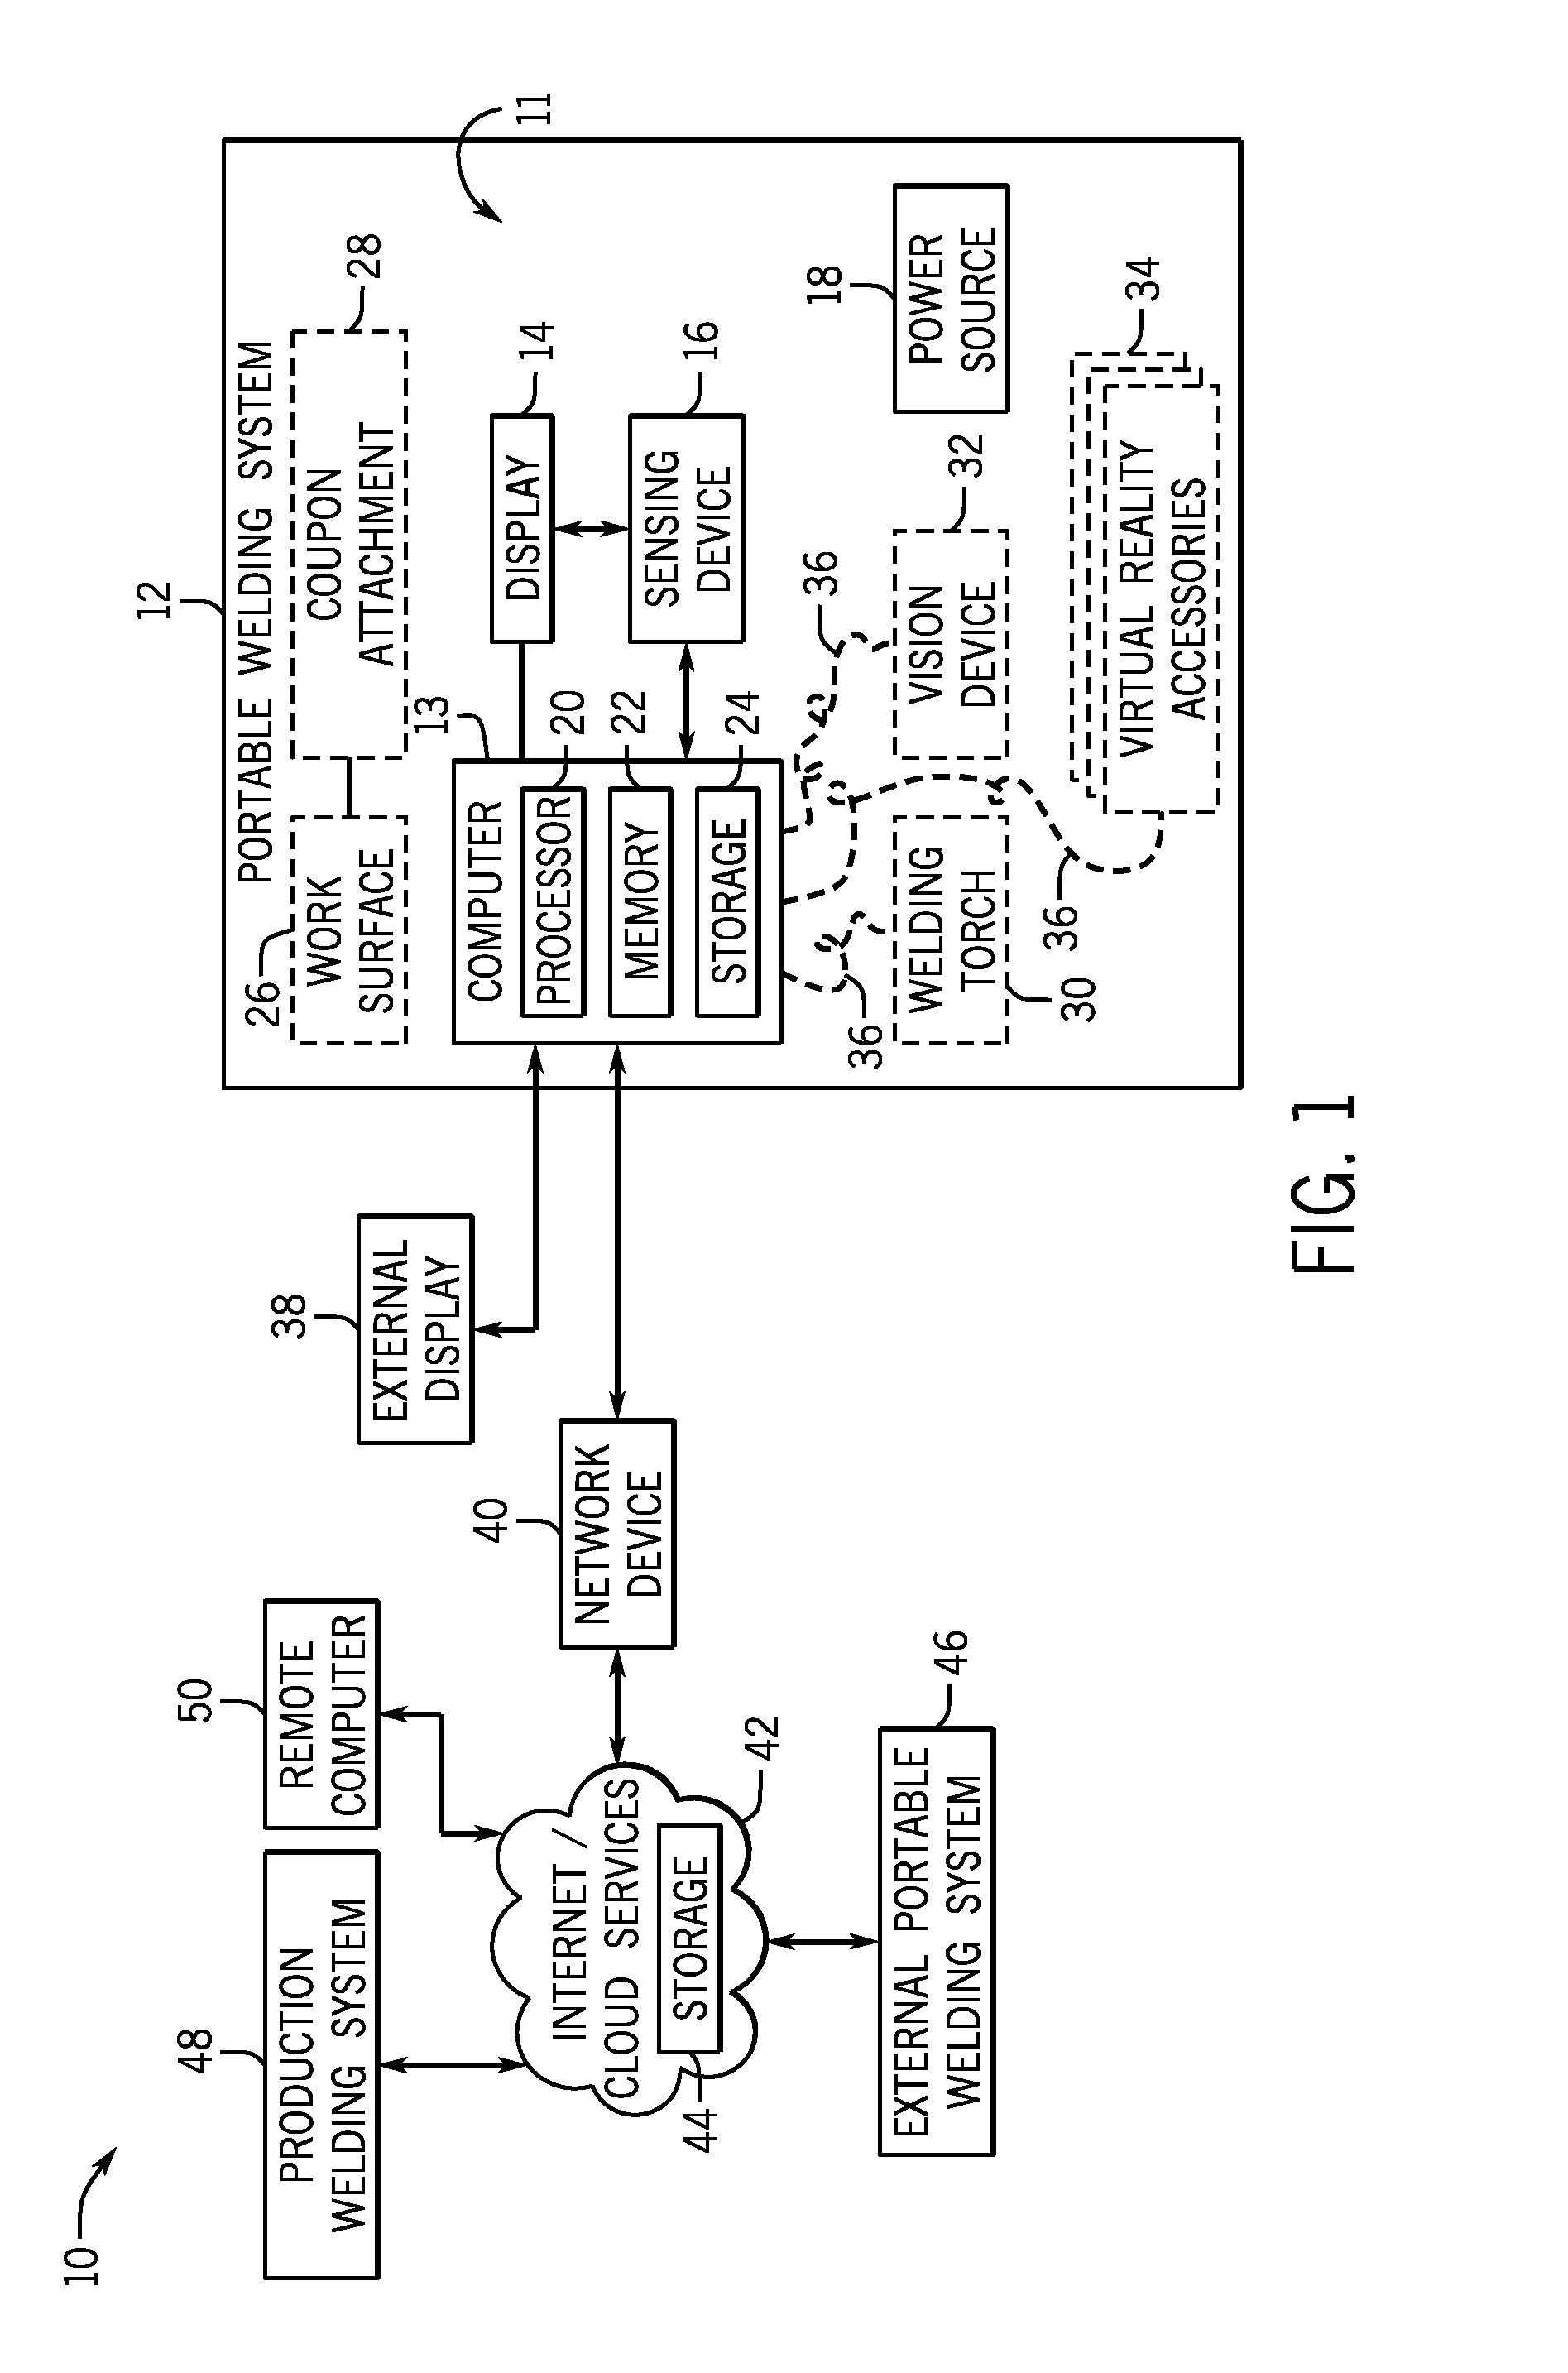 Weld training system and method